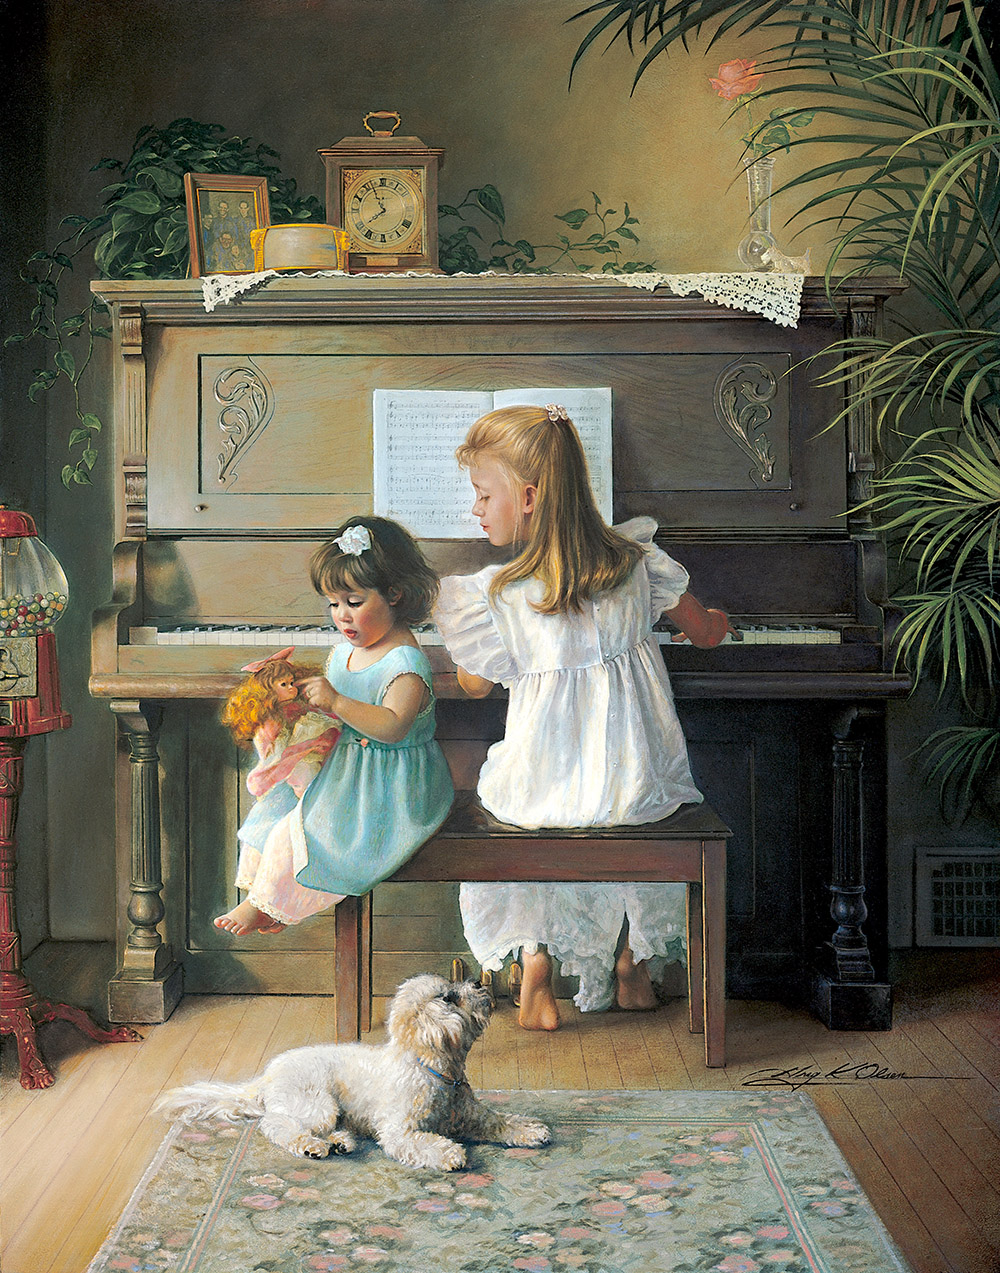 Melodies Remembered by Greg Olsen